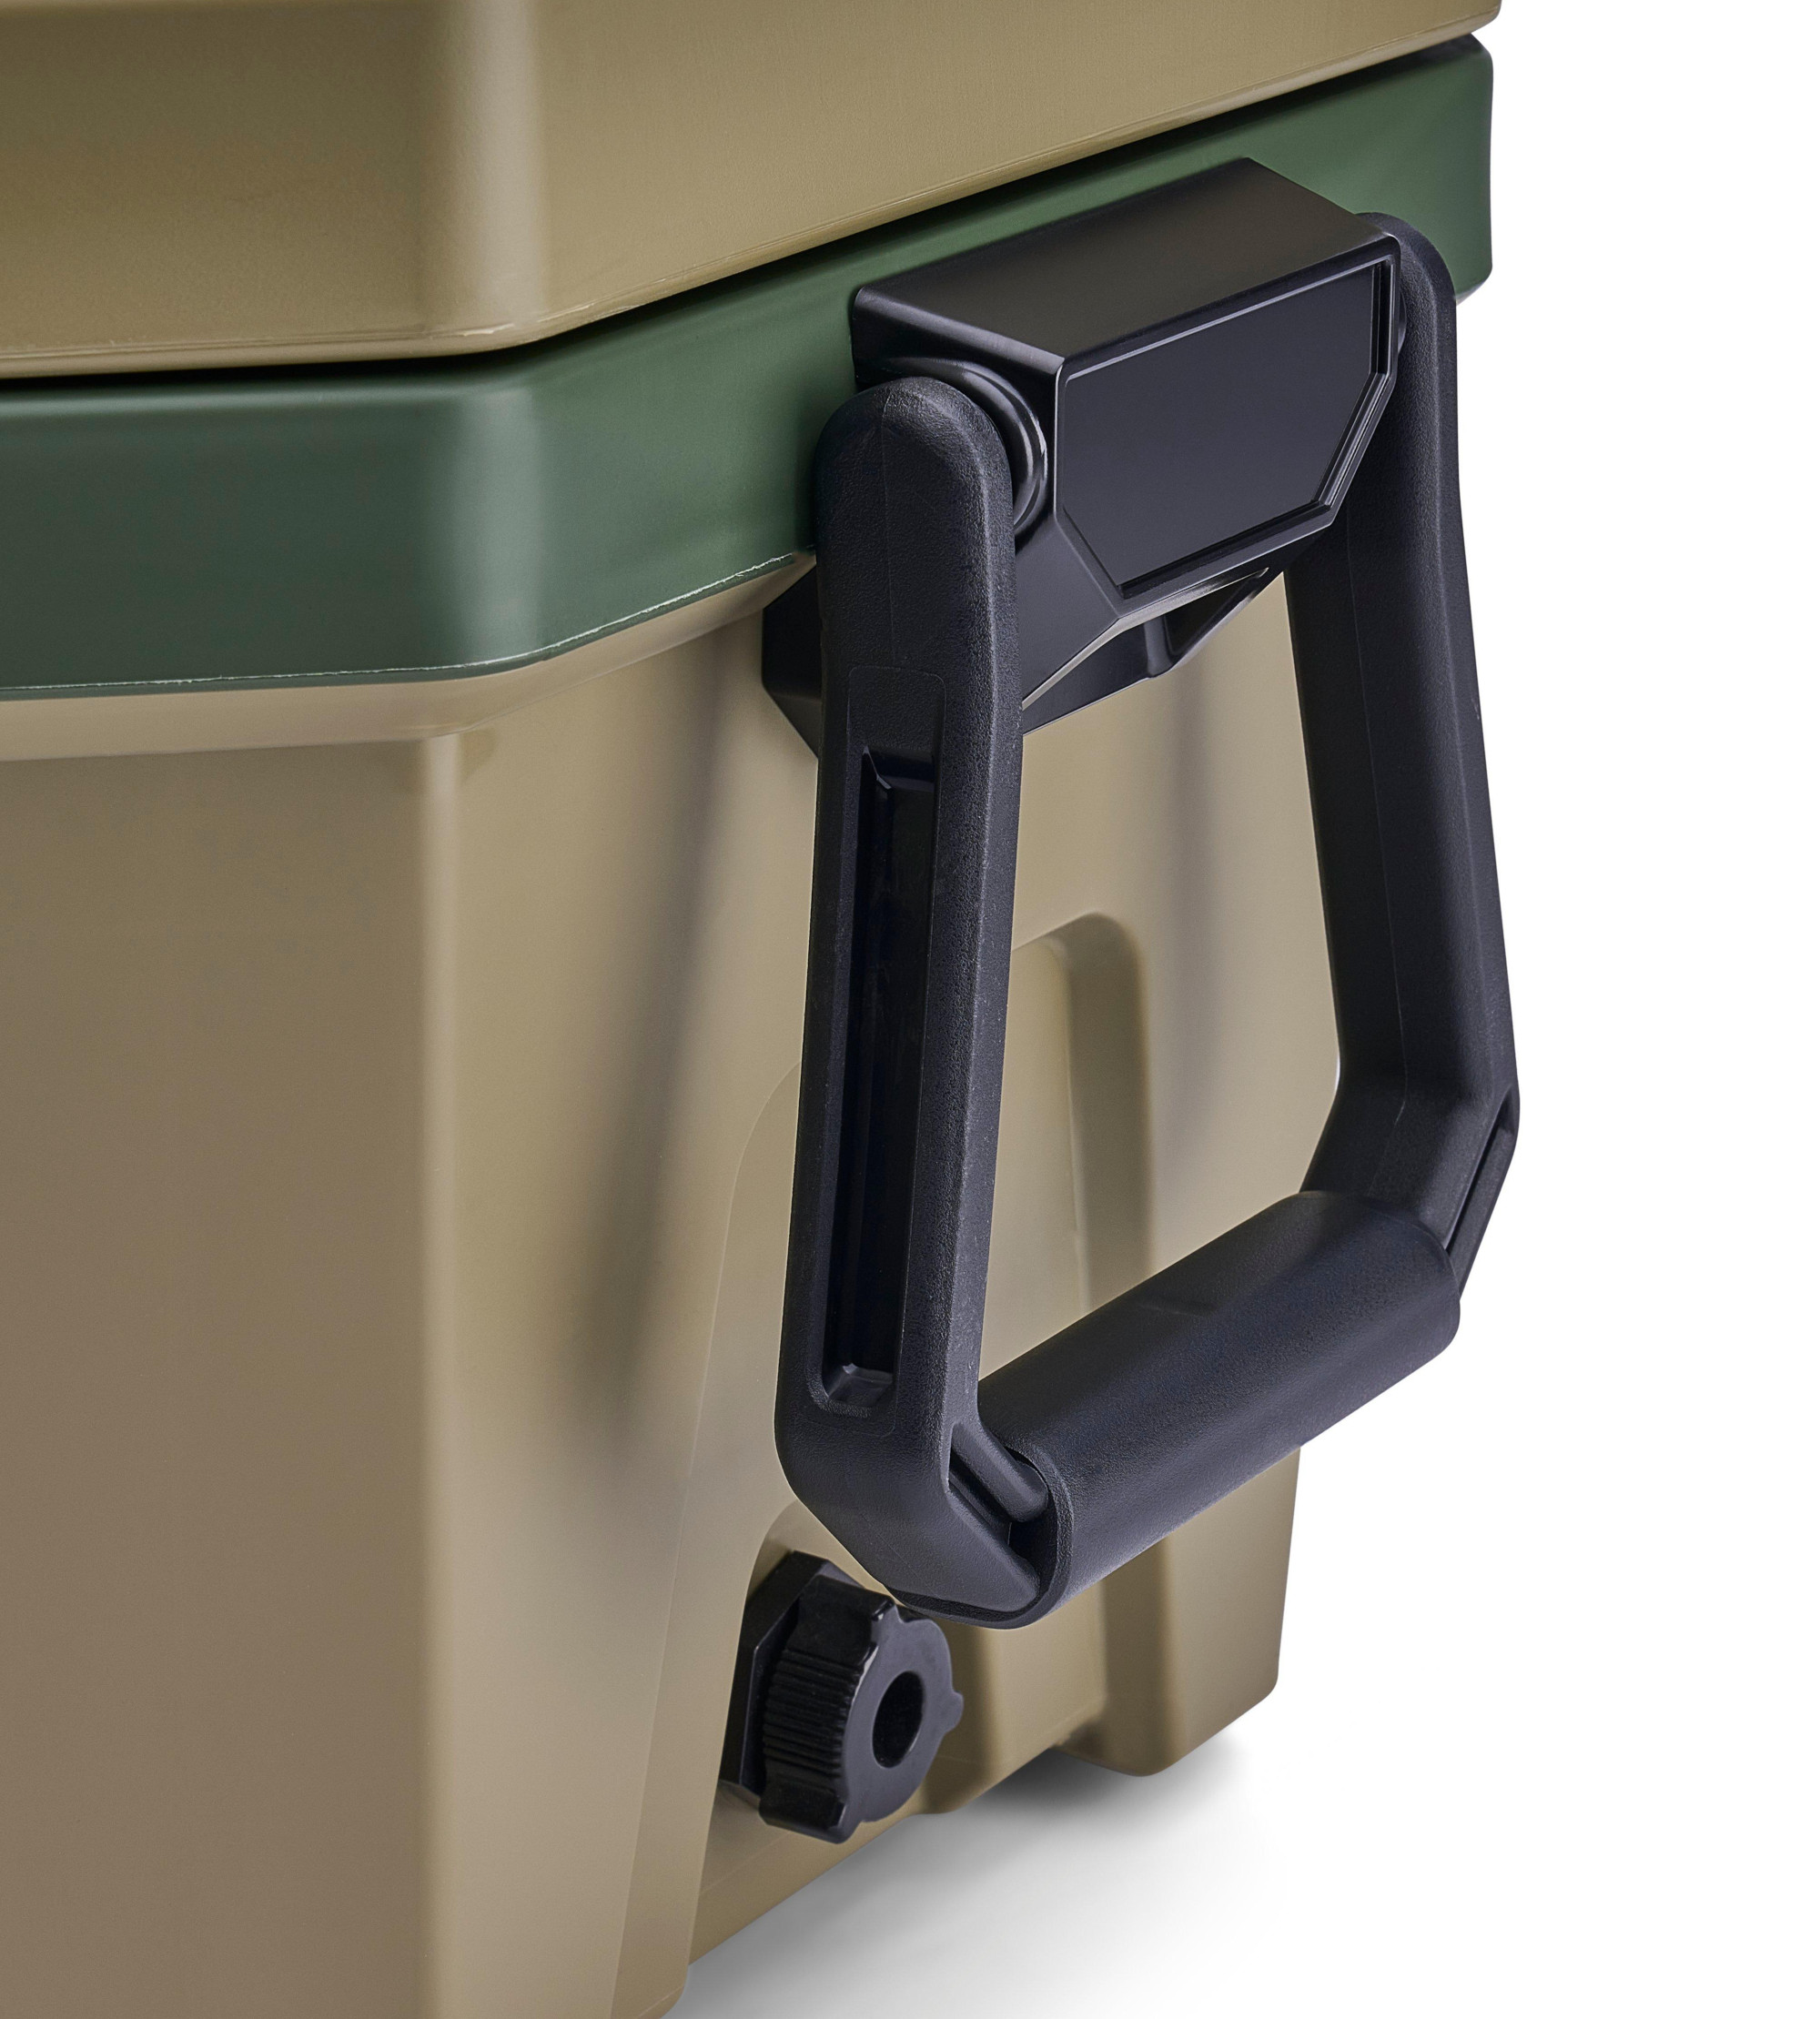 Plano Frost Hard Cooler 30L - Inland Green